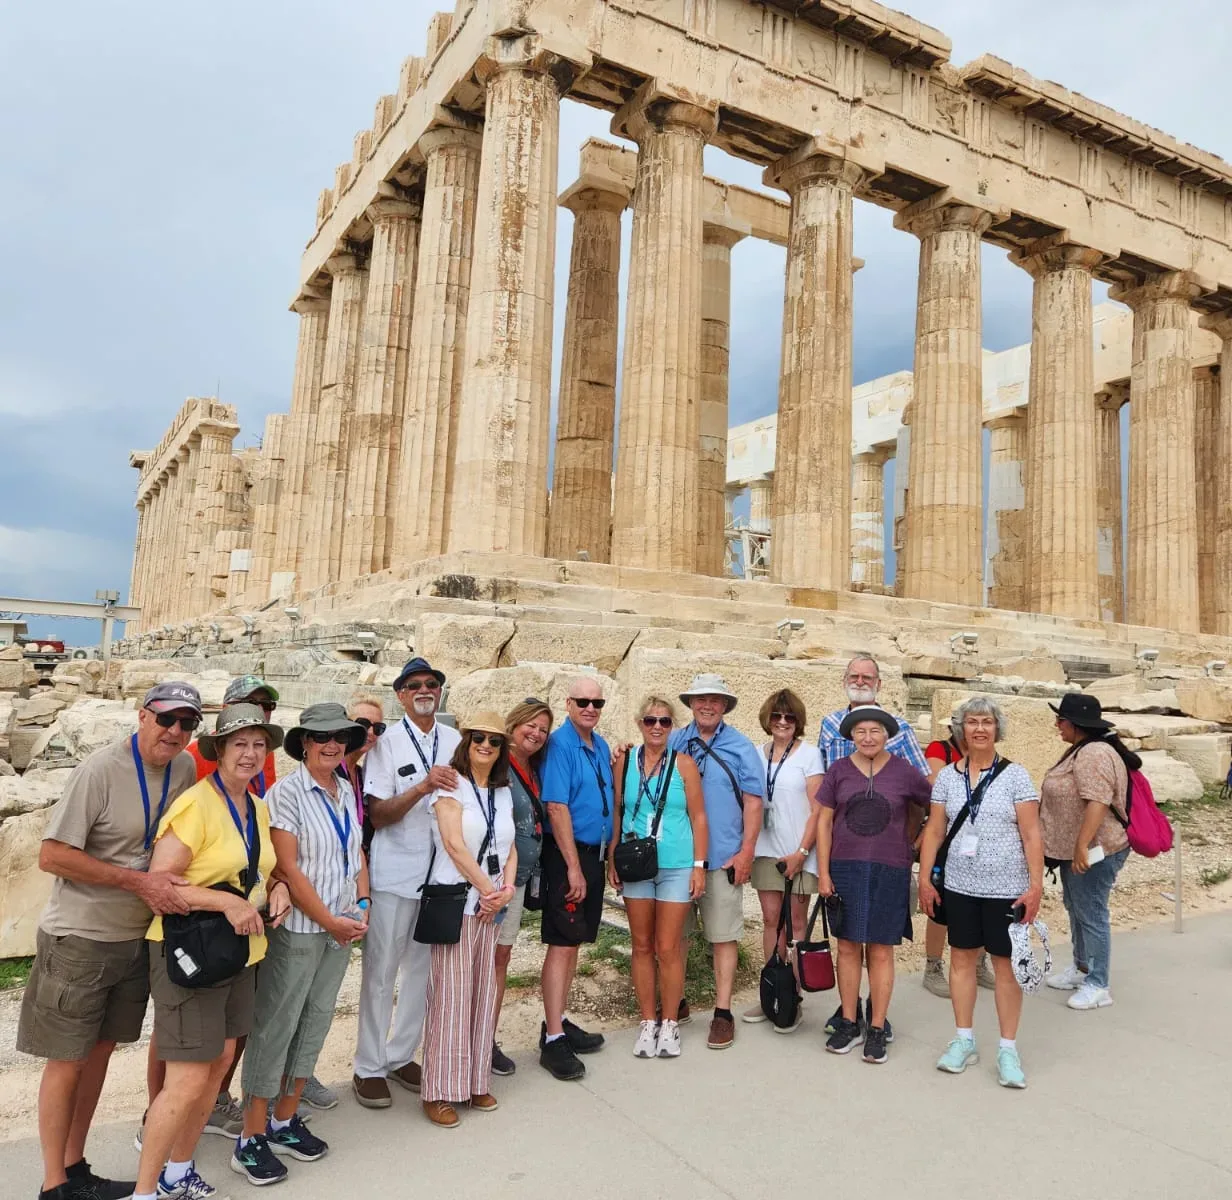 Smiling group in front of Parthenon temple